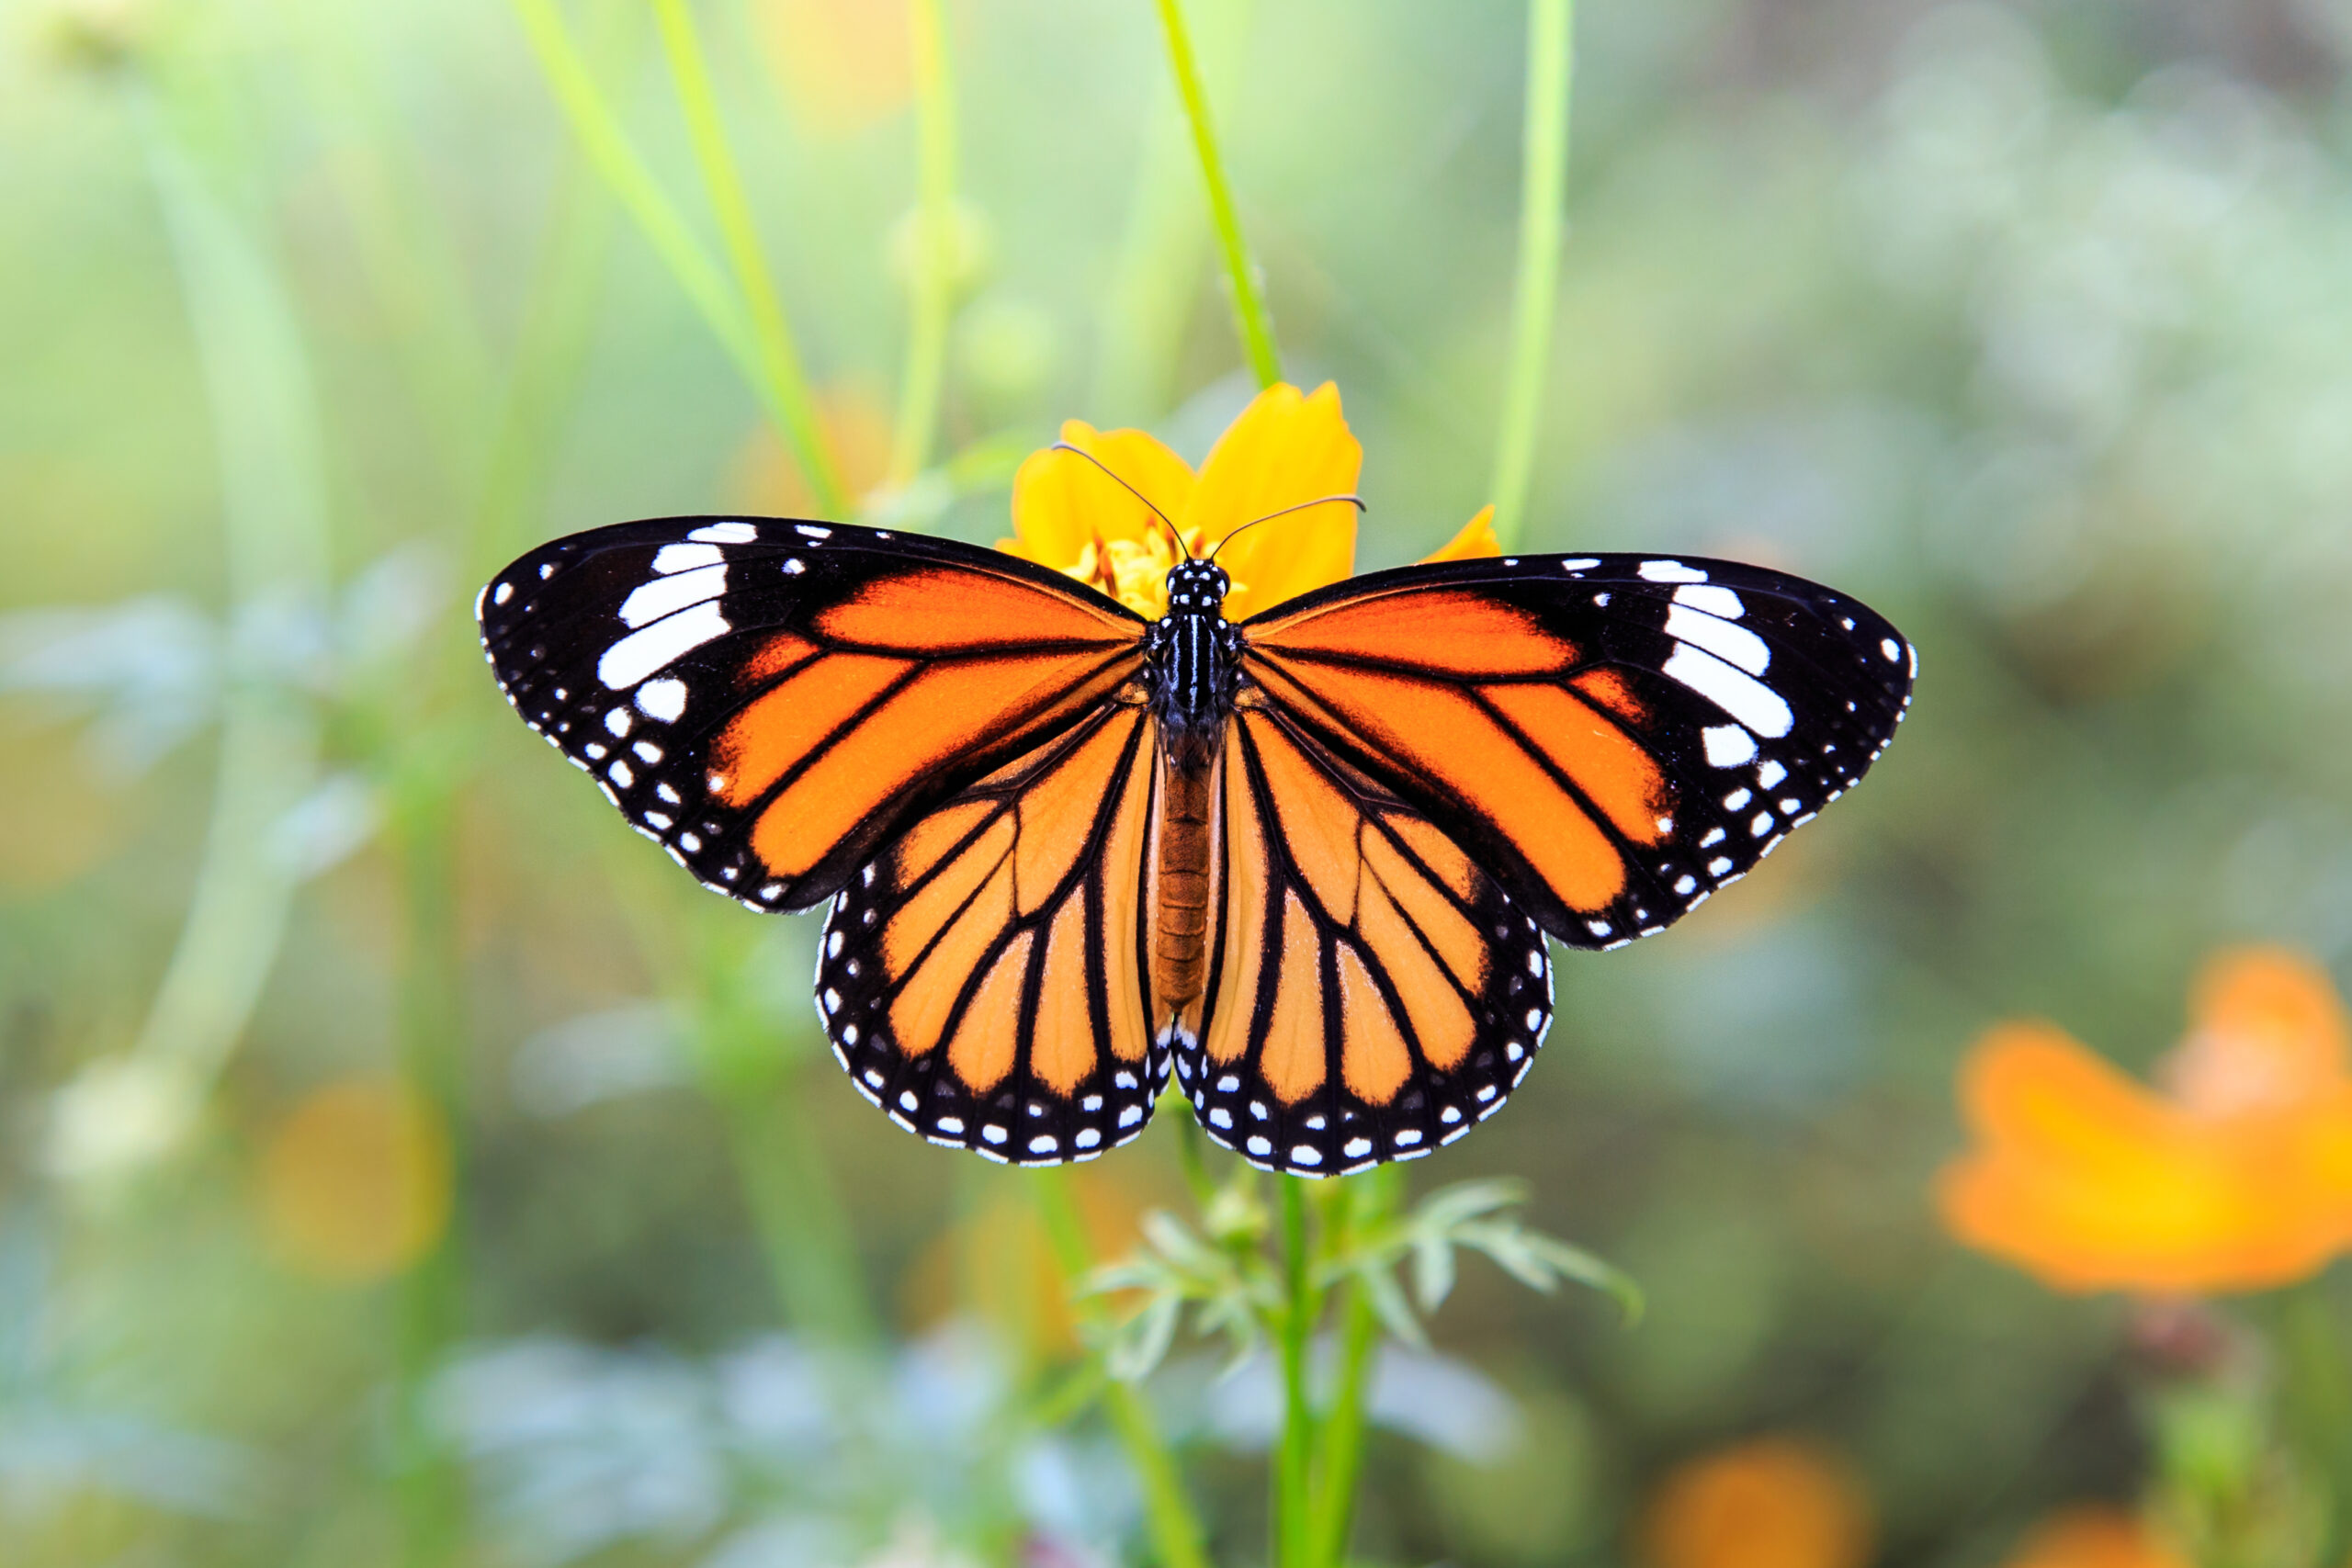 An orange butterfly with black markings perched on a cluster of orange cosmos flowers. The butterfly has its wings spread out, revealing intricate patterns of black veins and spots. The background shows other flowers and green foliage.